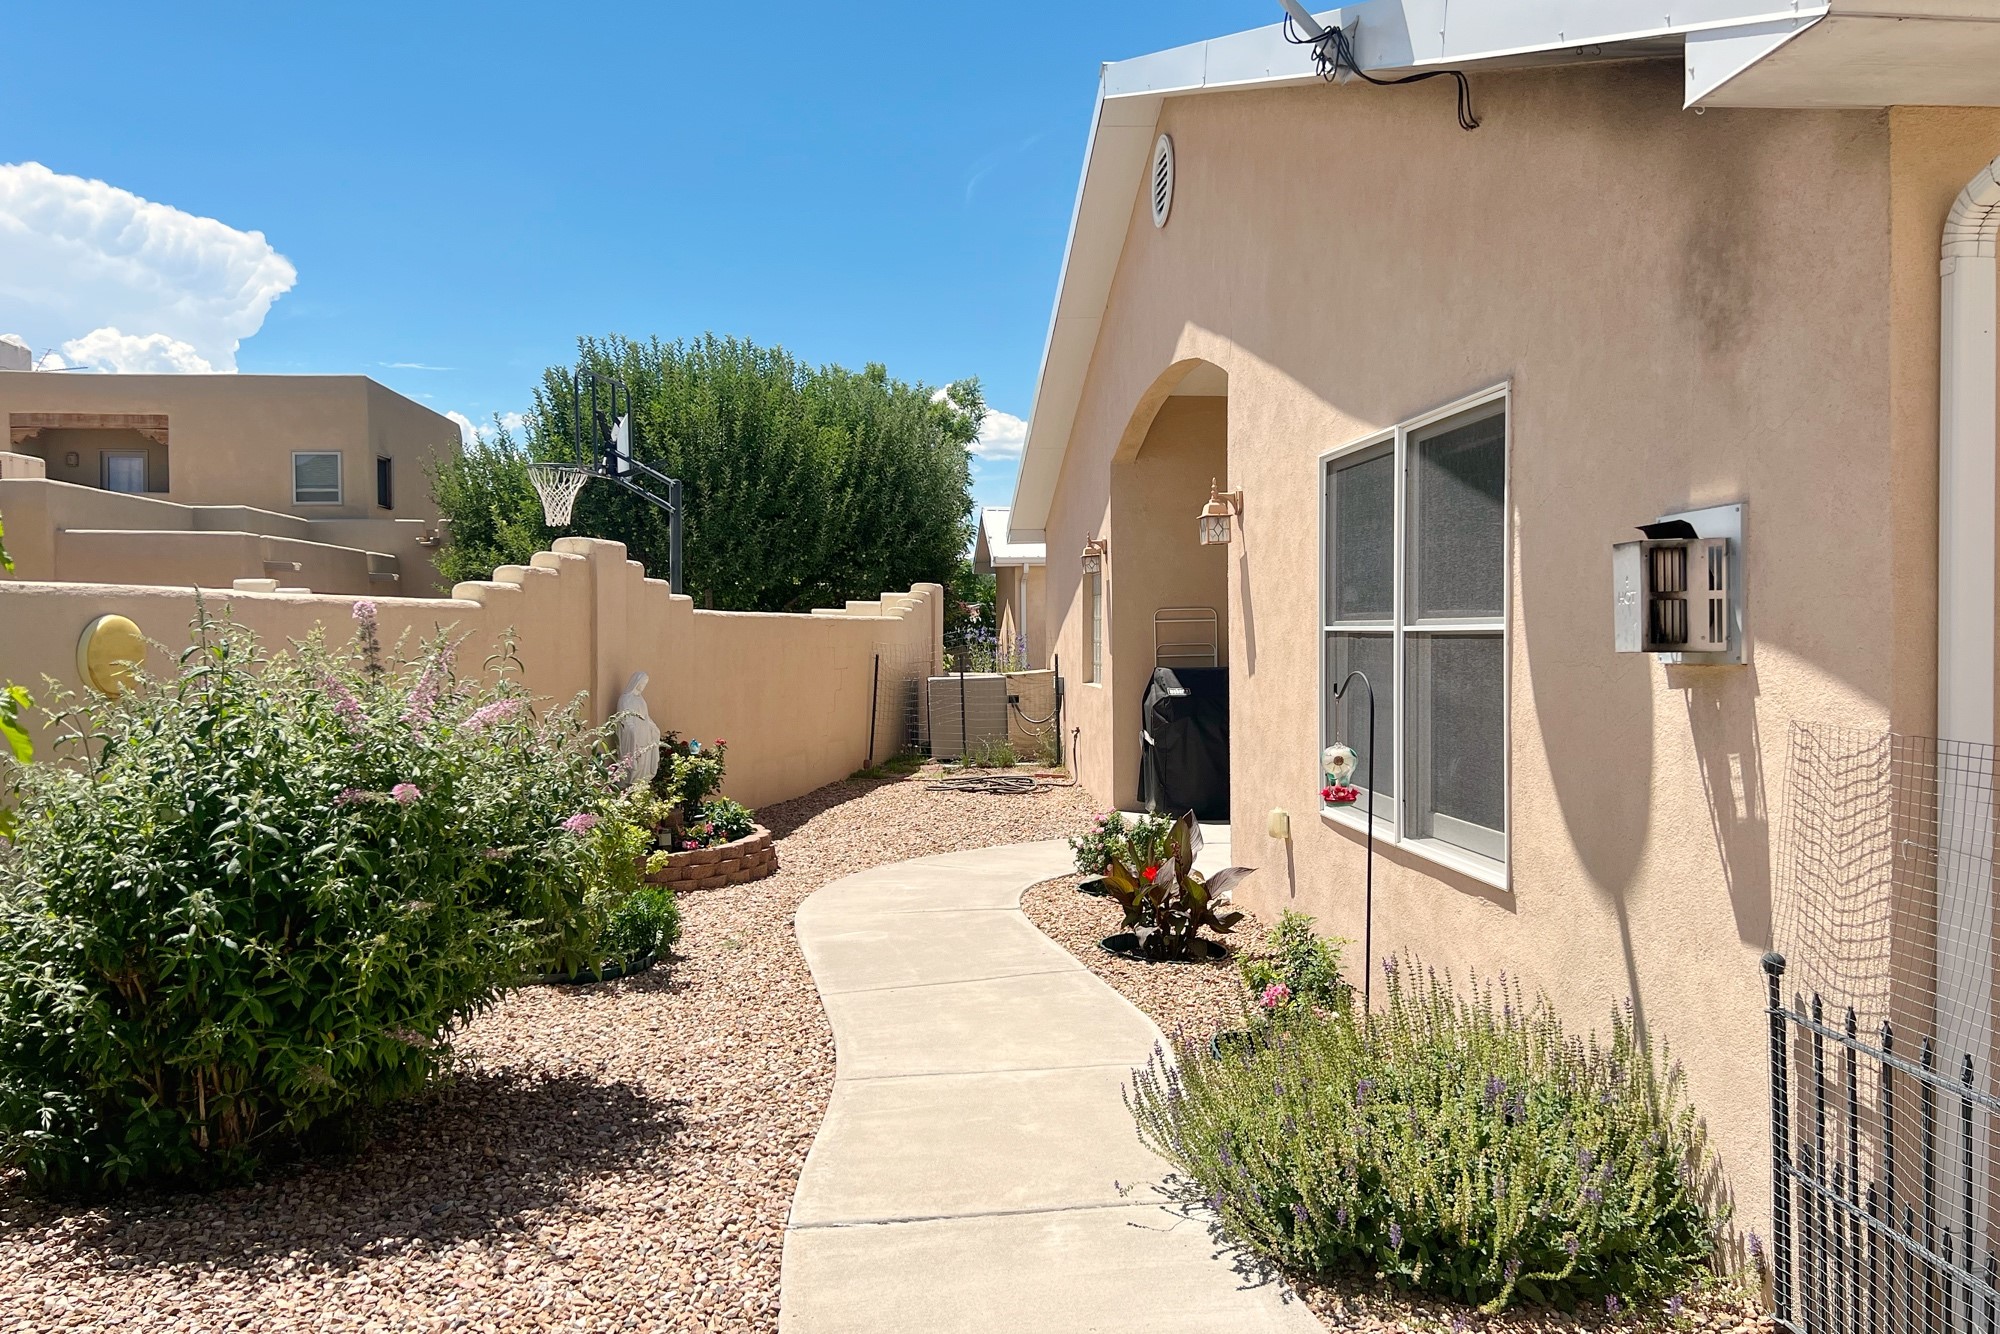 1146 Calle Sombra, Espanola, New Mexico 87532, 3 Bedrooms Bedrooms, ,2 BathroomsBathrooms,Residential,For Sale,1146 Calle Sombra,202232144